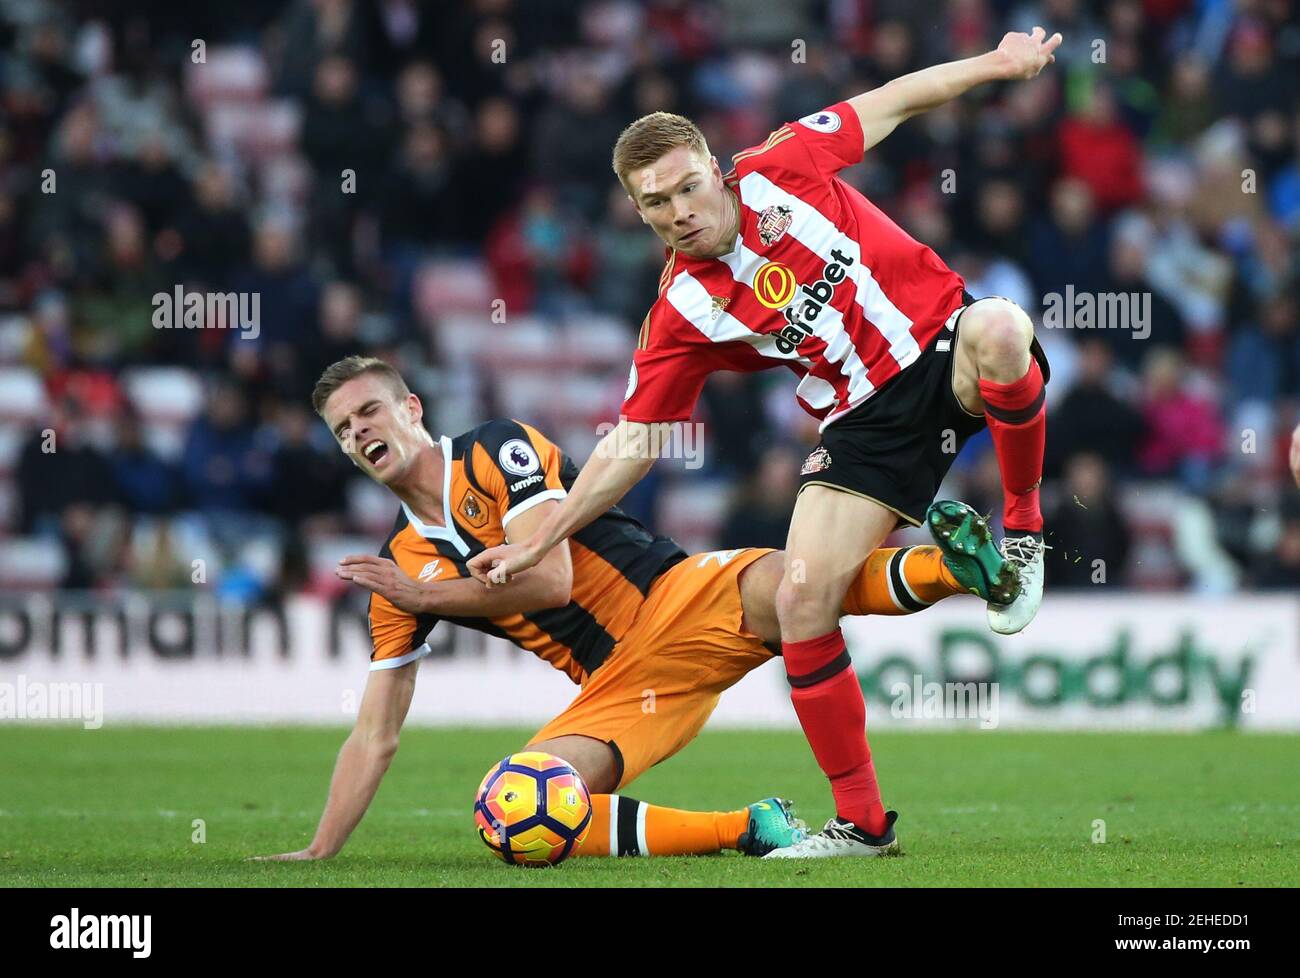 Britain Football Soccer - Sunderland v Hull City - Premier League - The Stadium of Light - 19/11/16 Sunderland's Duncan Watmore in action Hull City's Markus Henriksen  Reuters / Scott Heppell Livepic EDITORIAL USE ONLY. No use with unauthorized audio, video, data, fixture lists, club/league logos or 'live' services. Online in-match use limited to 45 images, no video emulation. No use in betting, games or single club/league/player publications.  Please contact your account representative for further details. Stock Photo